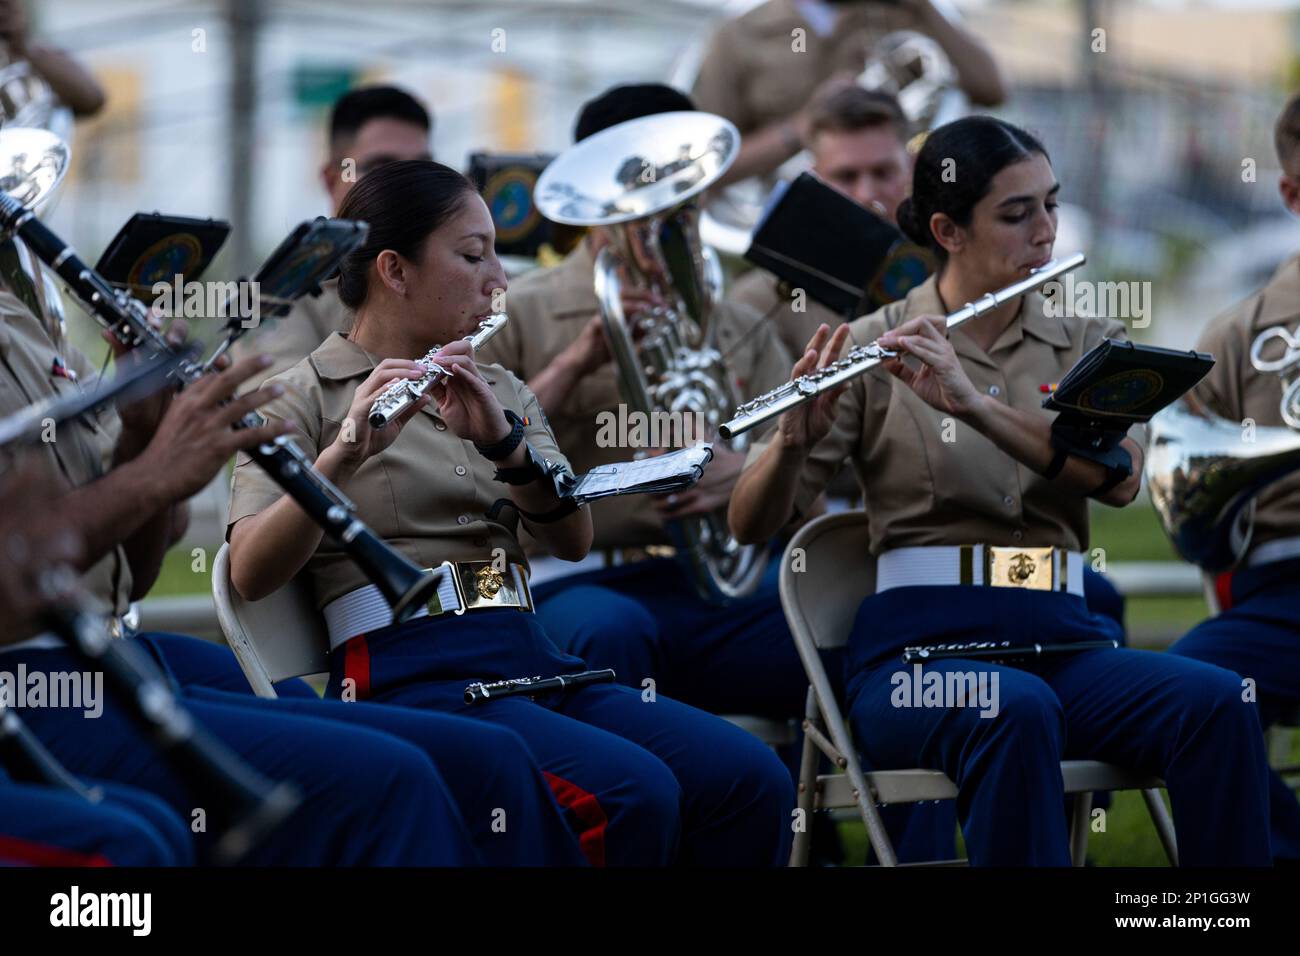 U.S. Marines with Marine Corps Forces Pacific Band perform for attendees during a live concert for the local community at Plaza de Espana, Hagatna, Guam, Jan. 23, 2023. The MARFORPAC Band participated in multiple community engagements during their visit to Guam as part of the Naval Support Activity, Marine Corps Base Camp Blaz Reactivation and Naming Ceremony. In order to encourage music education and showcase the vibrant history and tradition of military music, the band is active in providing clinics and concerts for the communities they serve. The MARFORPAC Band performs throughout the Indo- Stock Photo